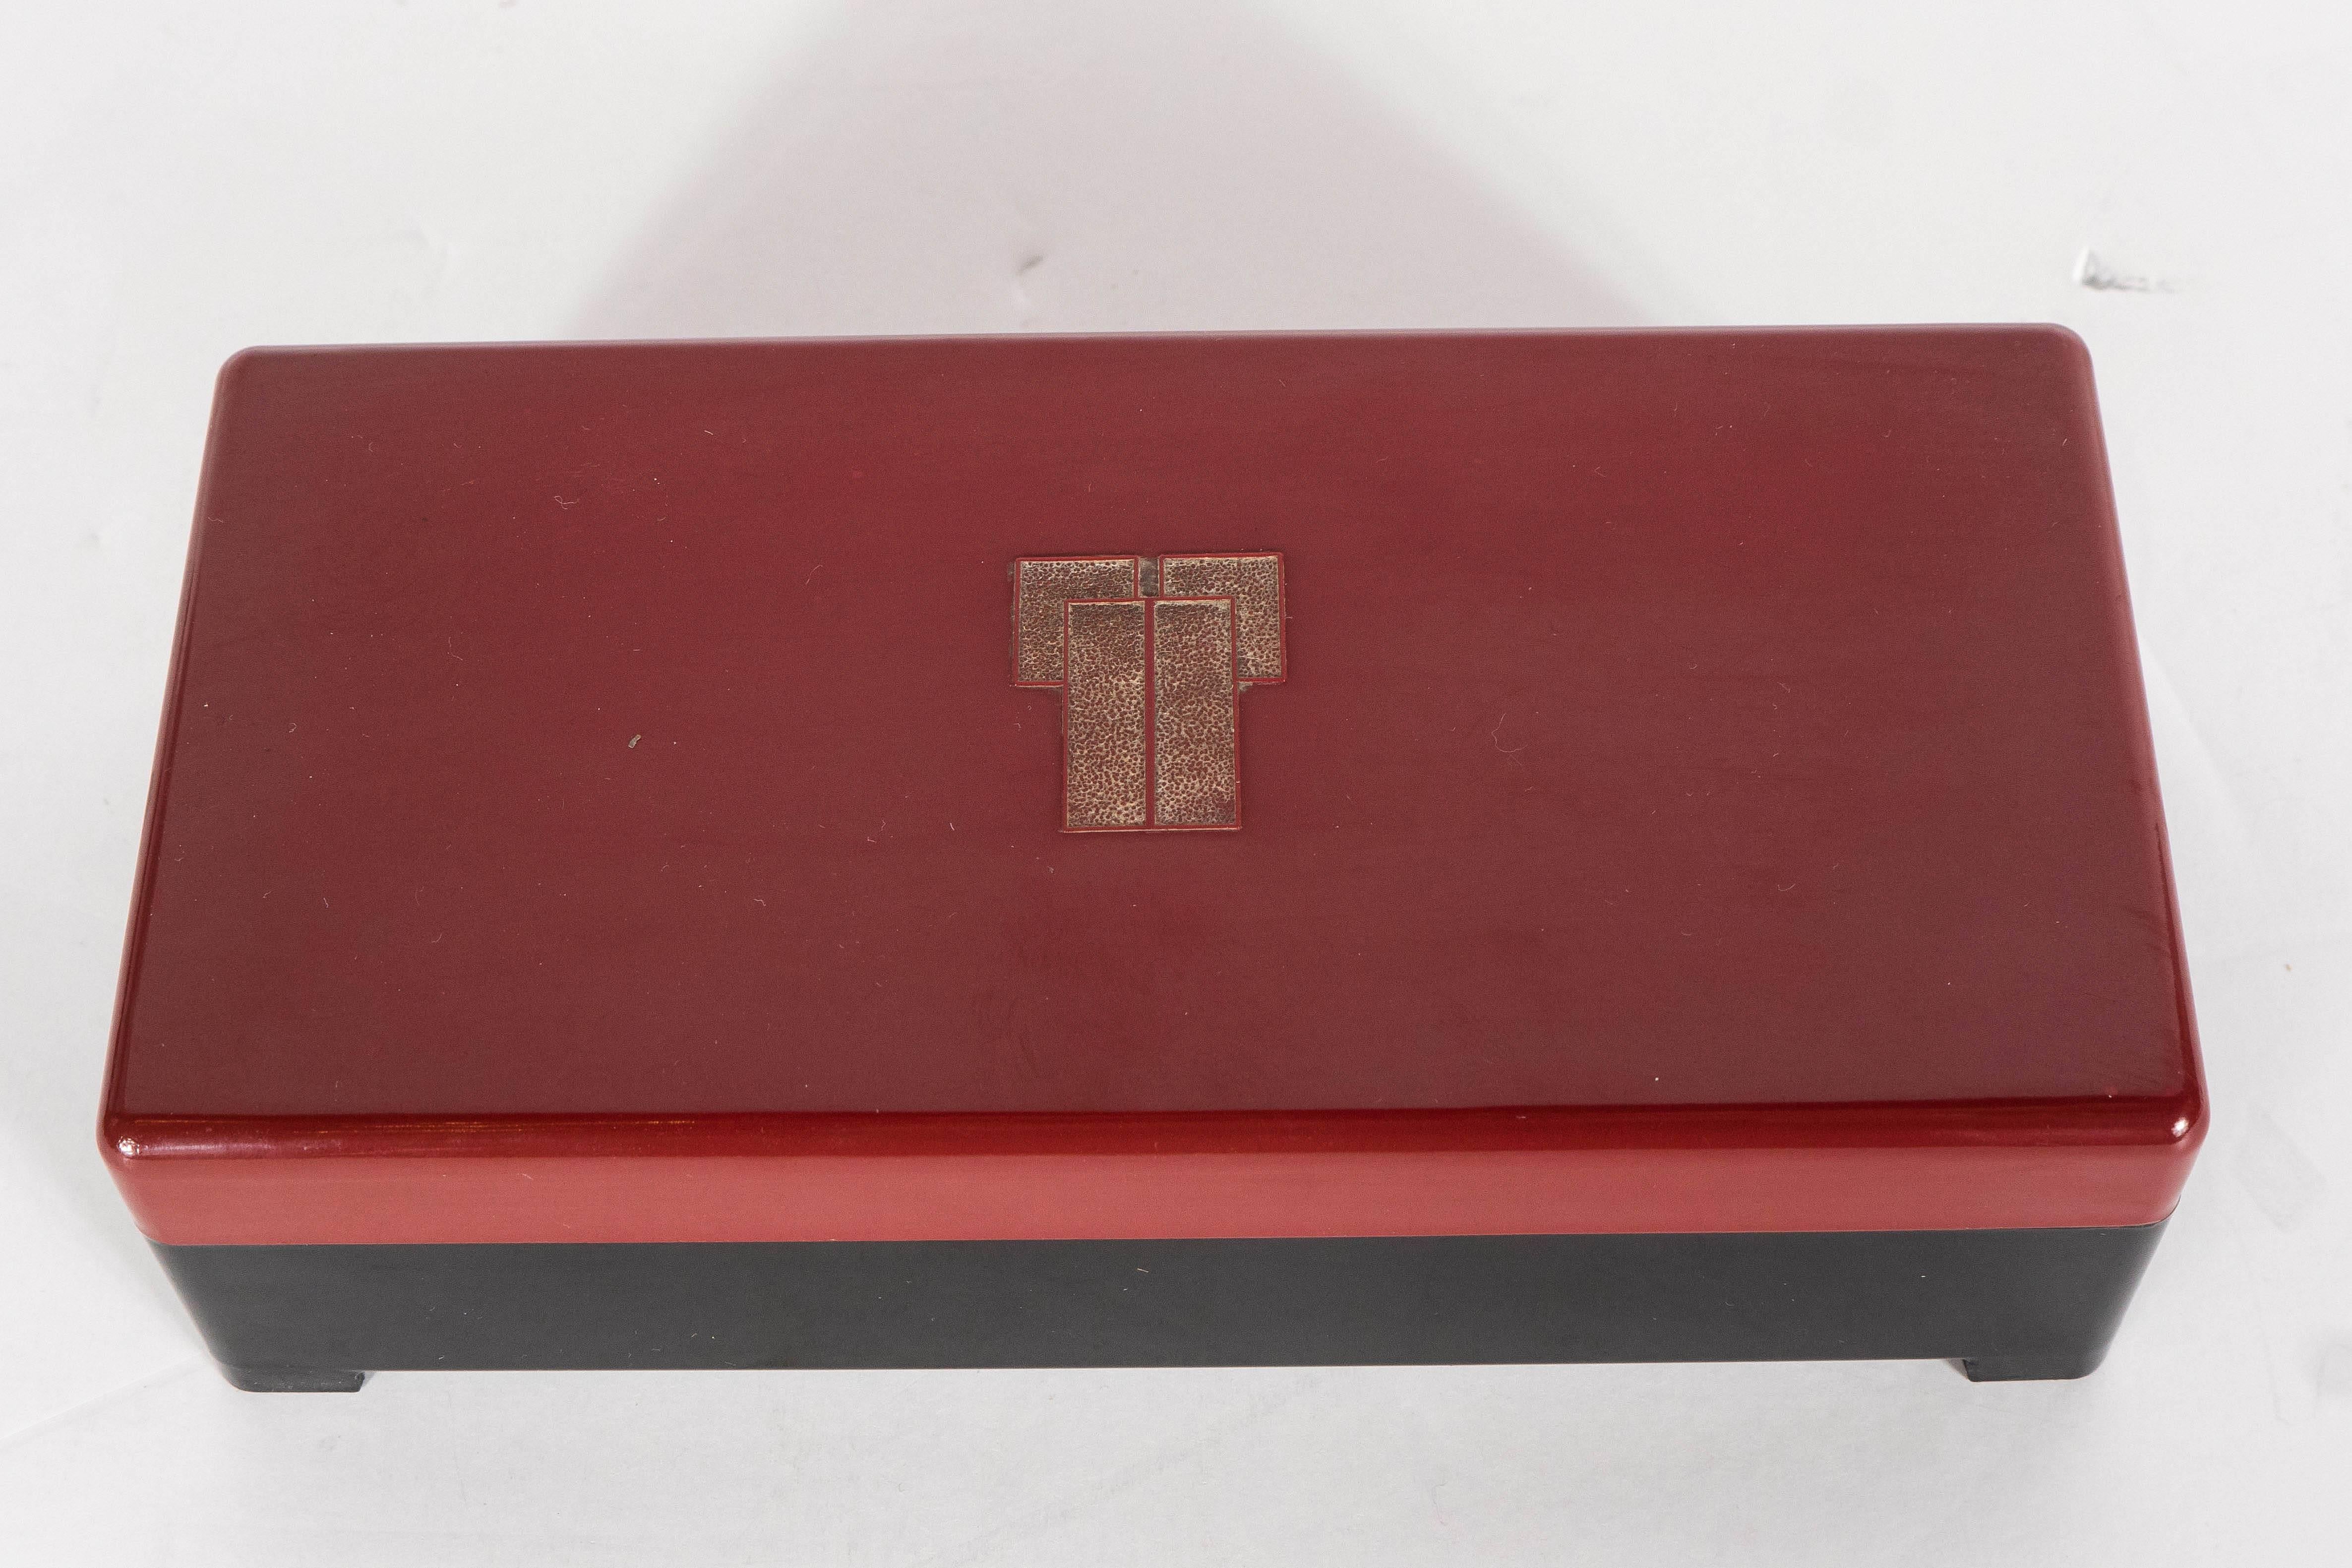 American Streamlined Art Deco Bakelite Box with Burgundy Top with Cubist Detail